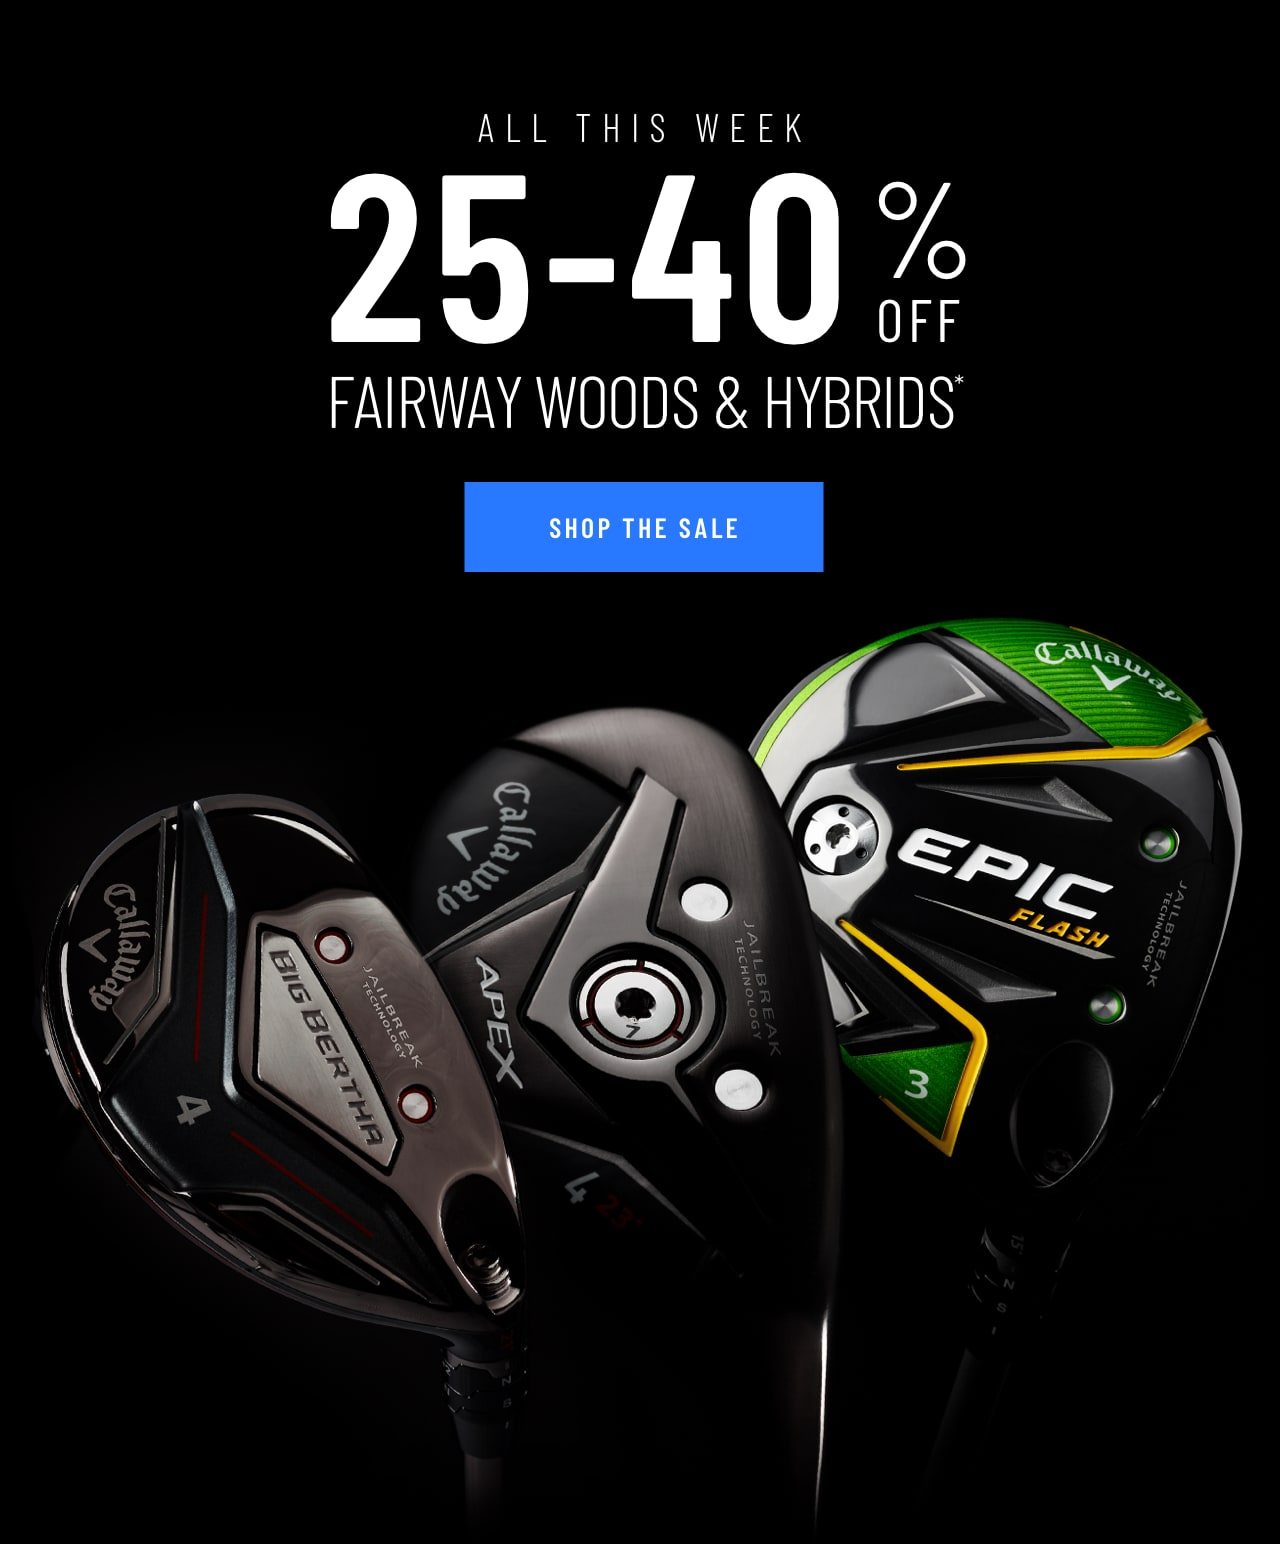 25-40% Off Fairway Woods and Hybrids. Shop Now!